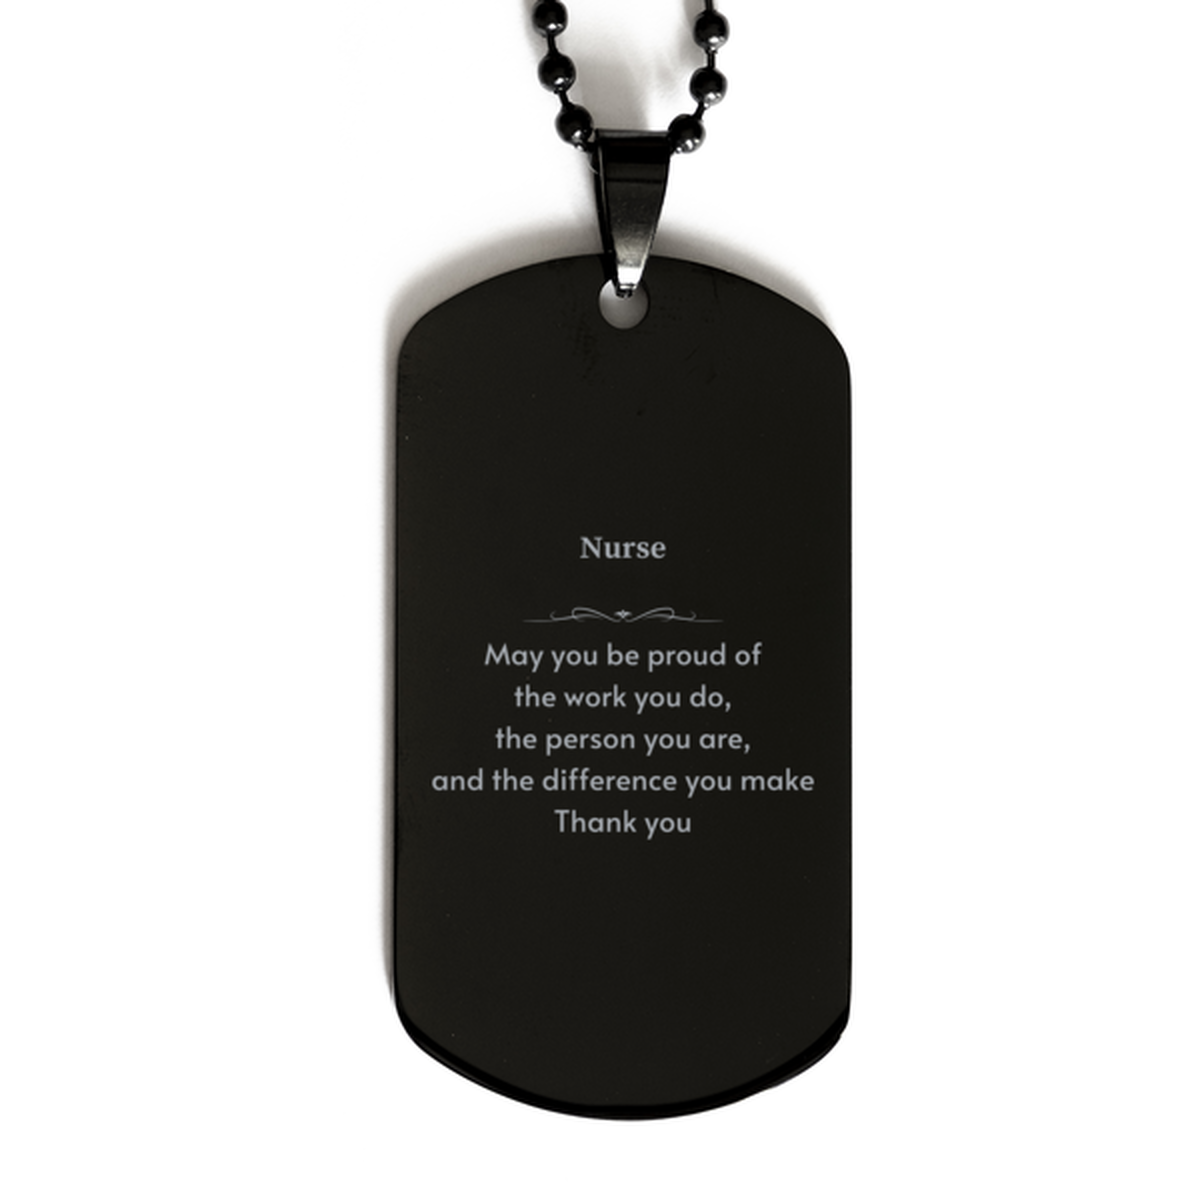 Heartwarming Black Dog Tag Retirement Coworkers Gifts for Nurse, Nurse May You be proud of the work you do, the person you are Gifts for Boss Men Women Friends